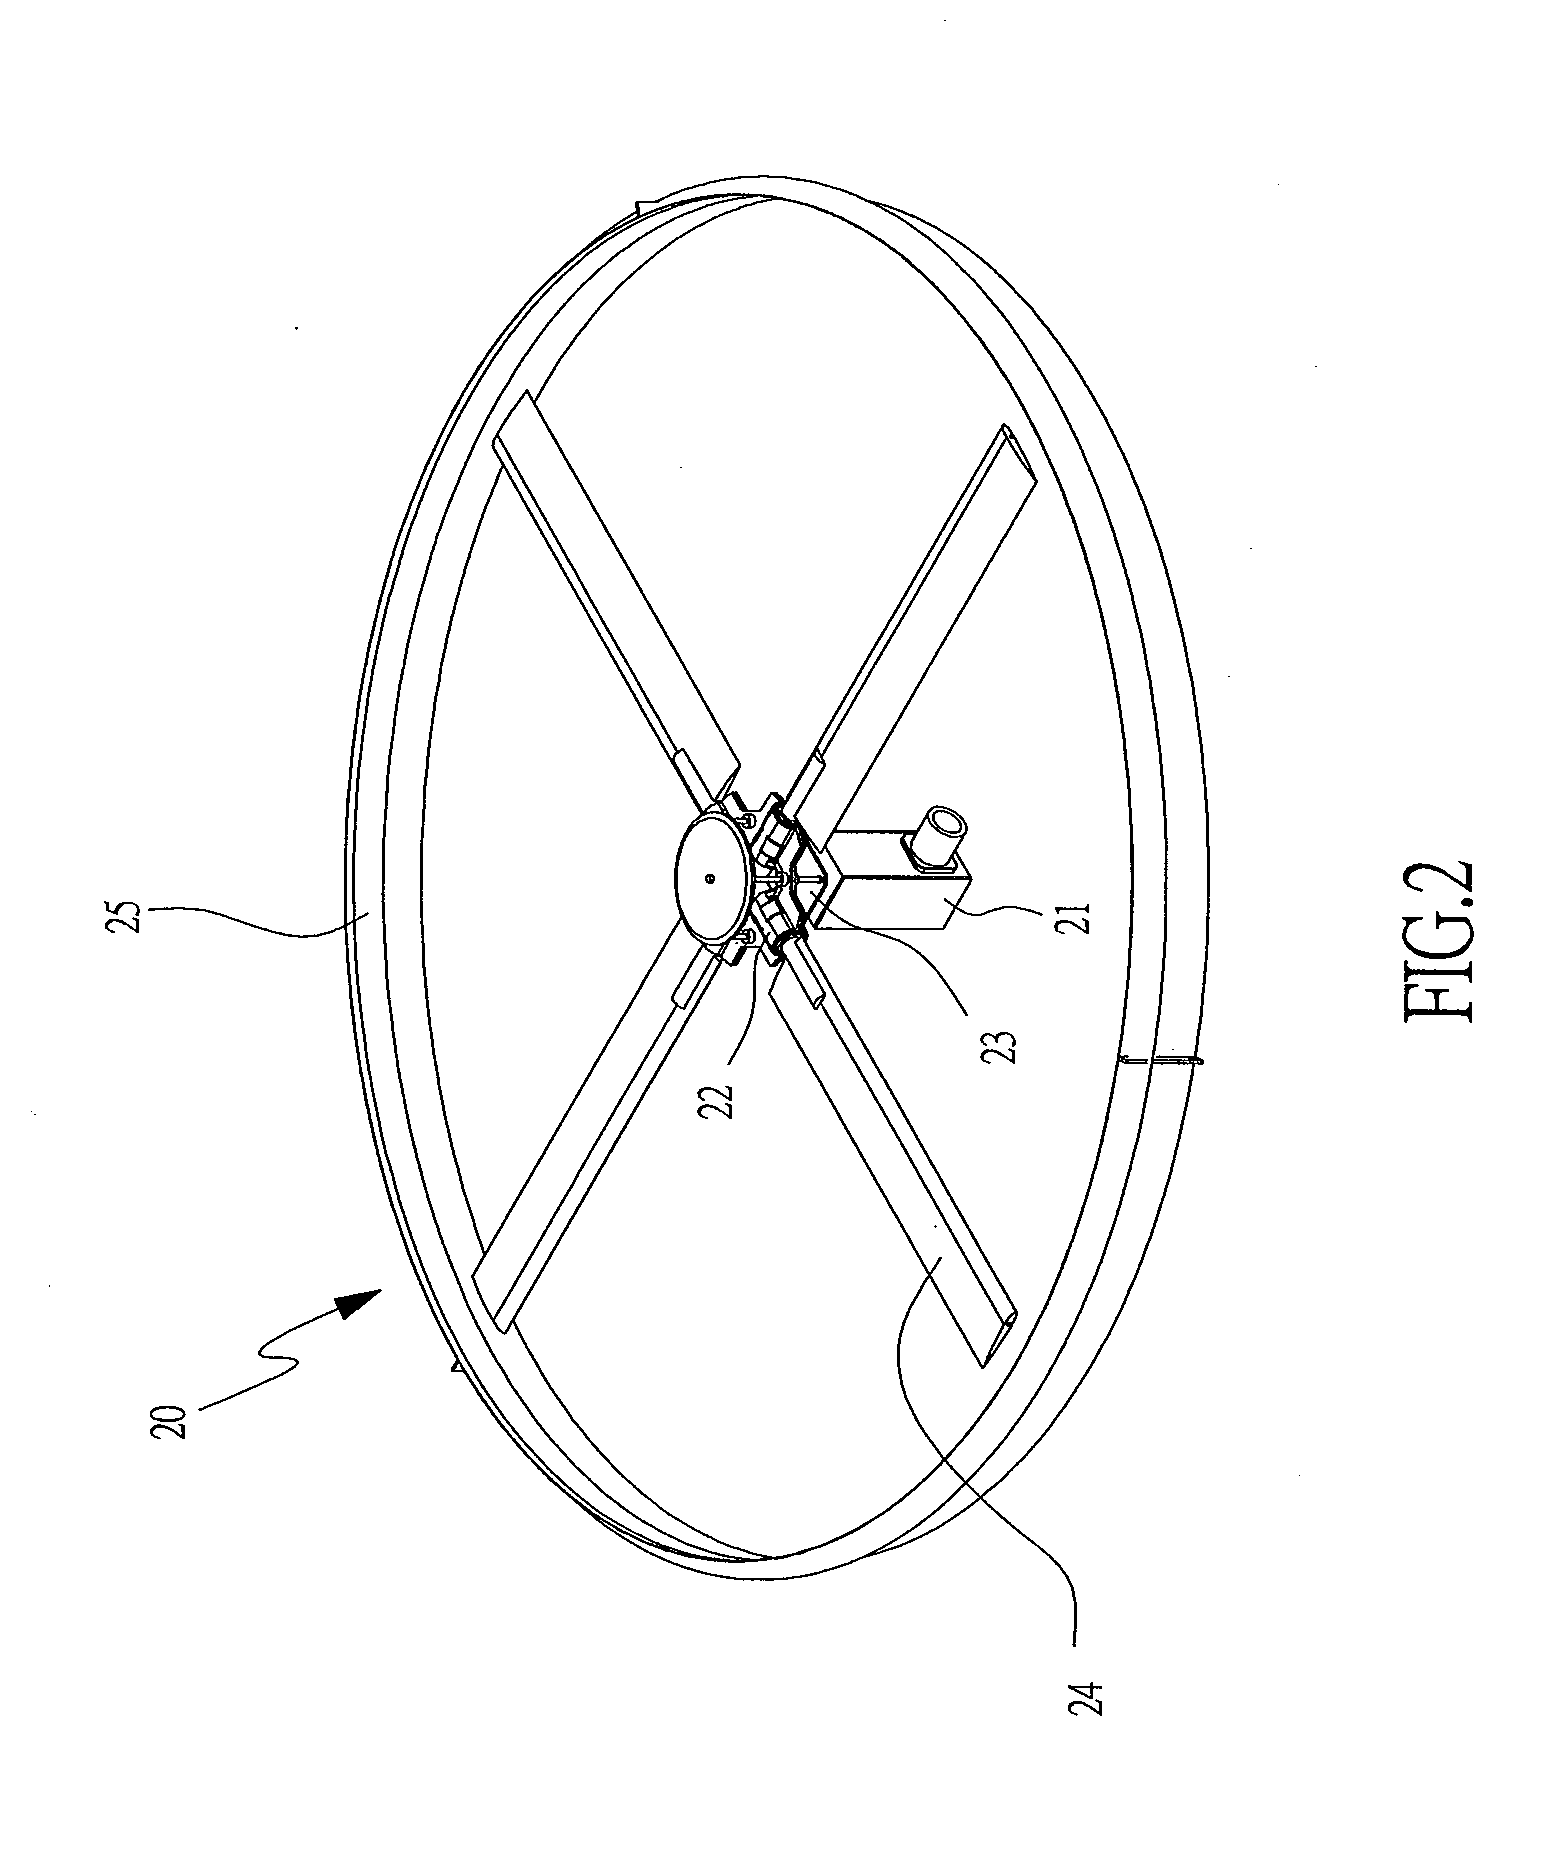 Helicopter with h-pattern structure